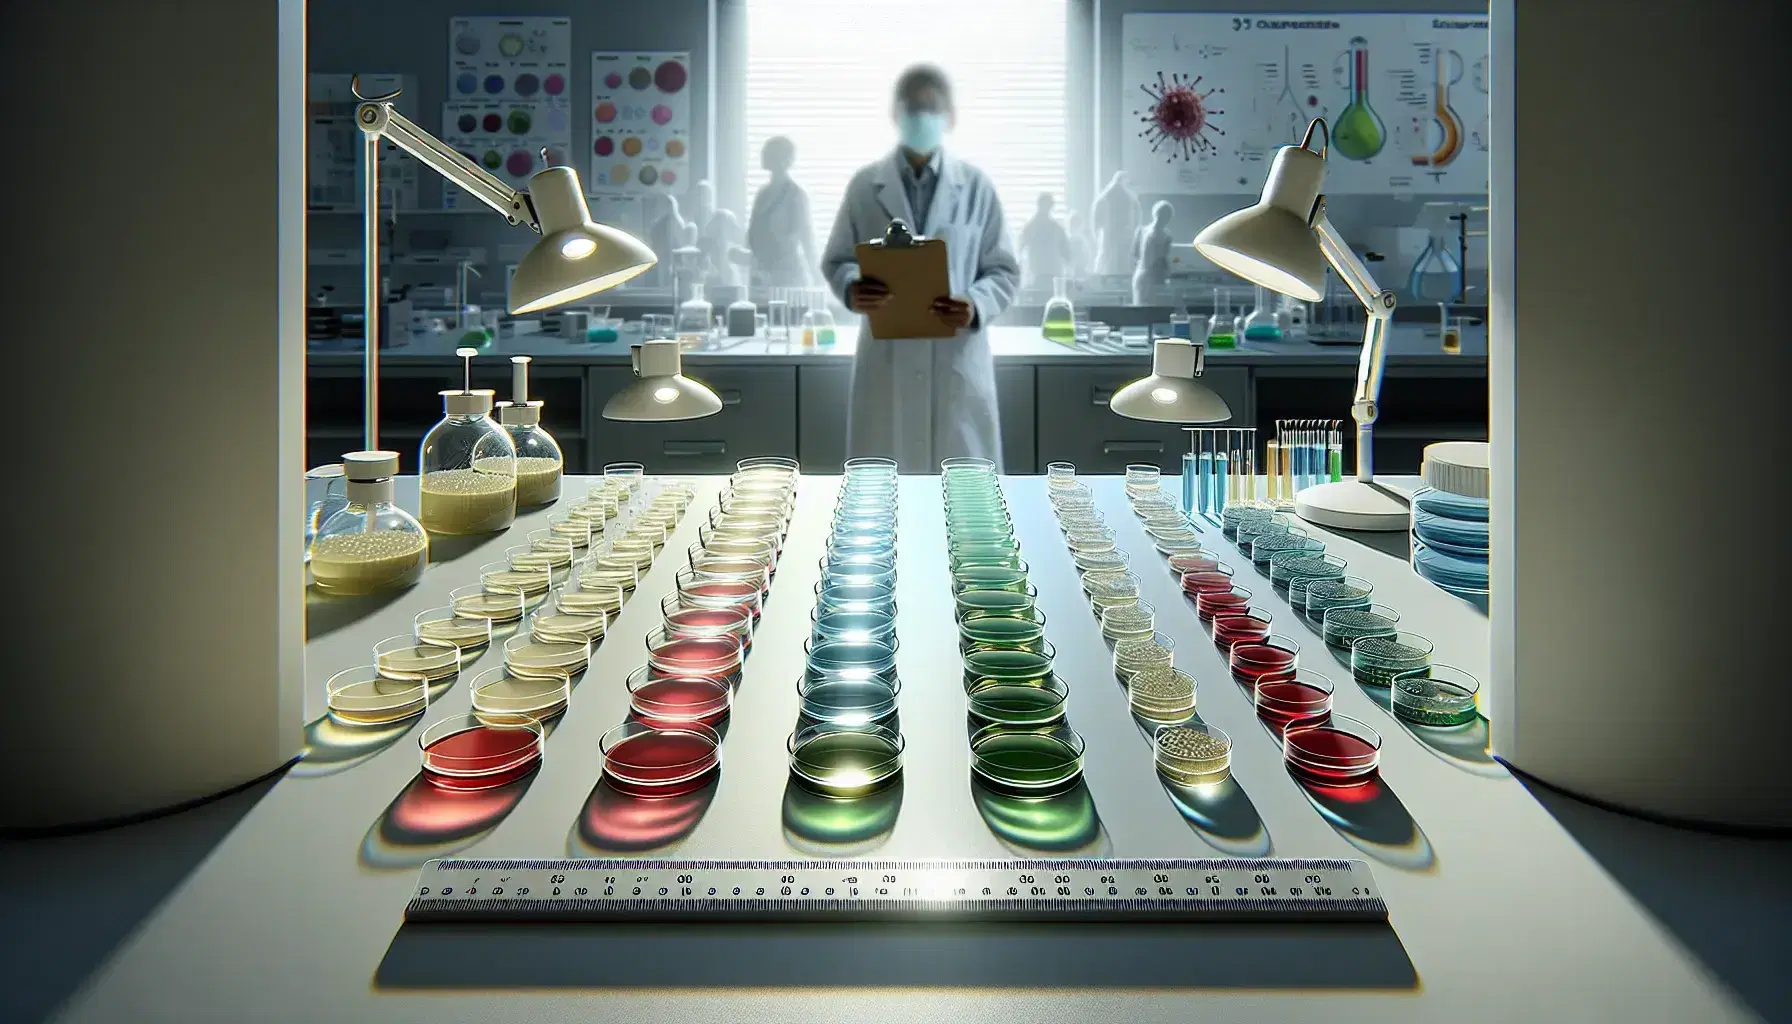 Laboratory with Petri dishes on bench, green agar on the left, red in the center, blue on the right, ruler above, background with researcher.